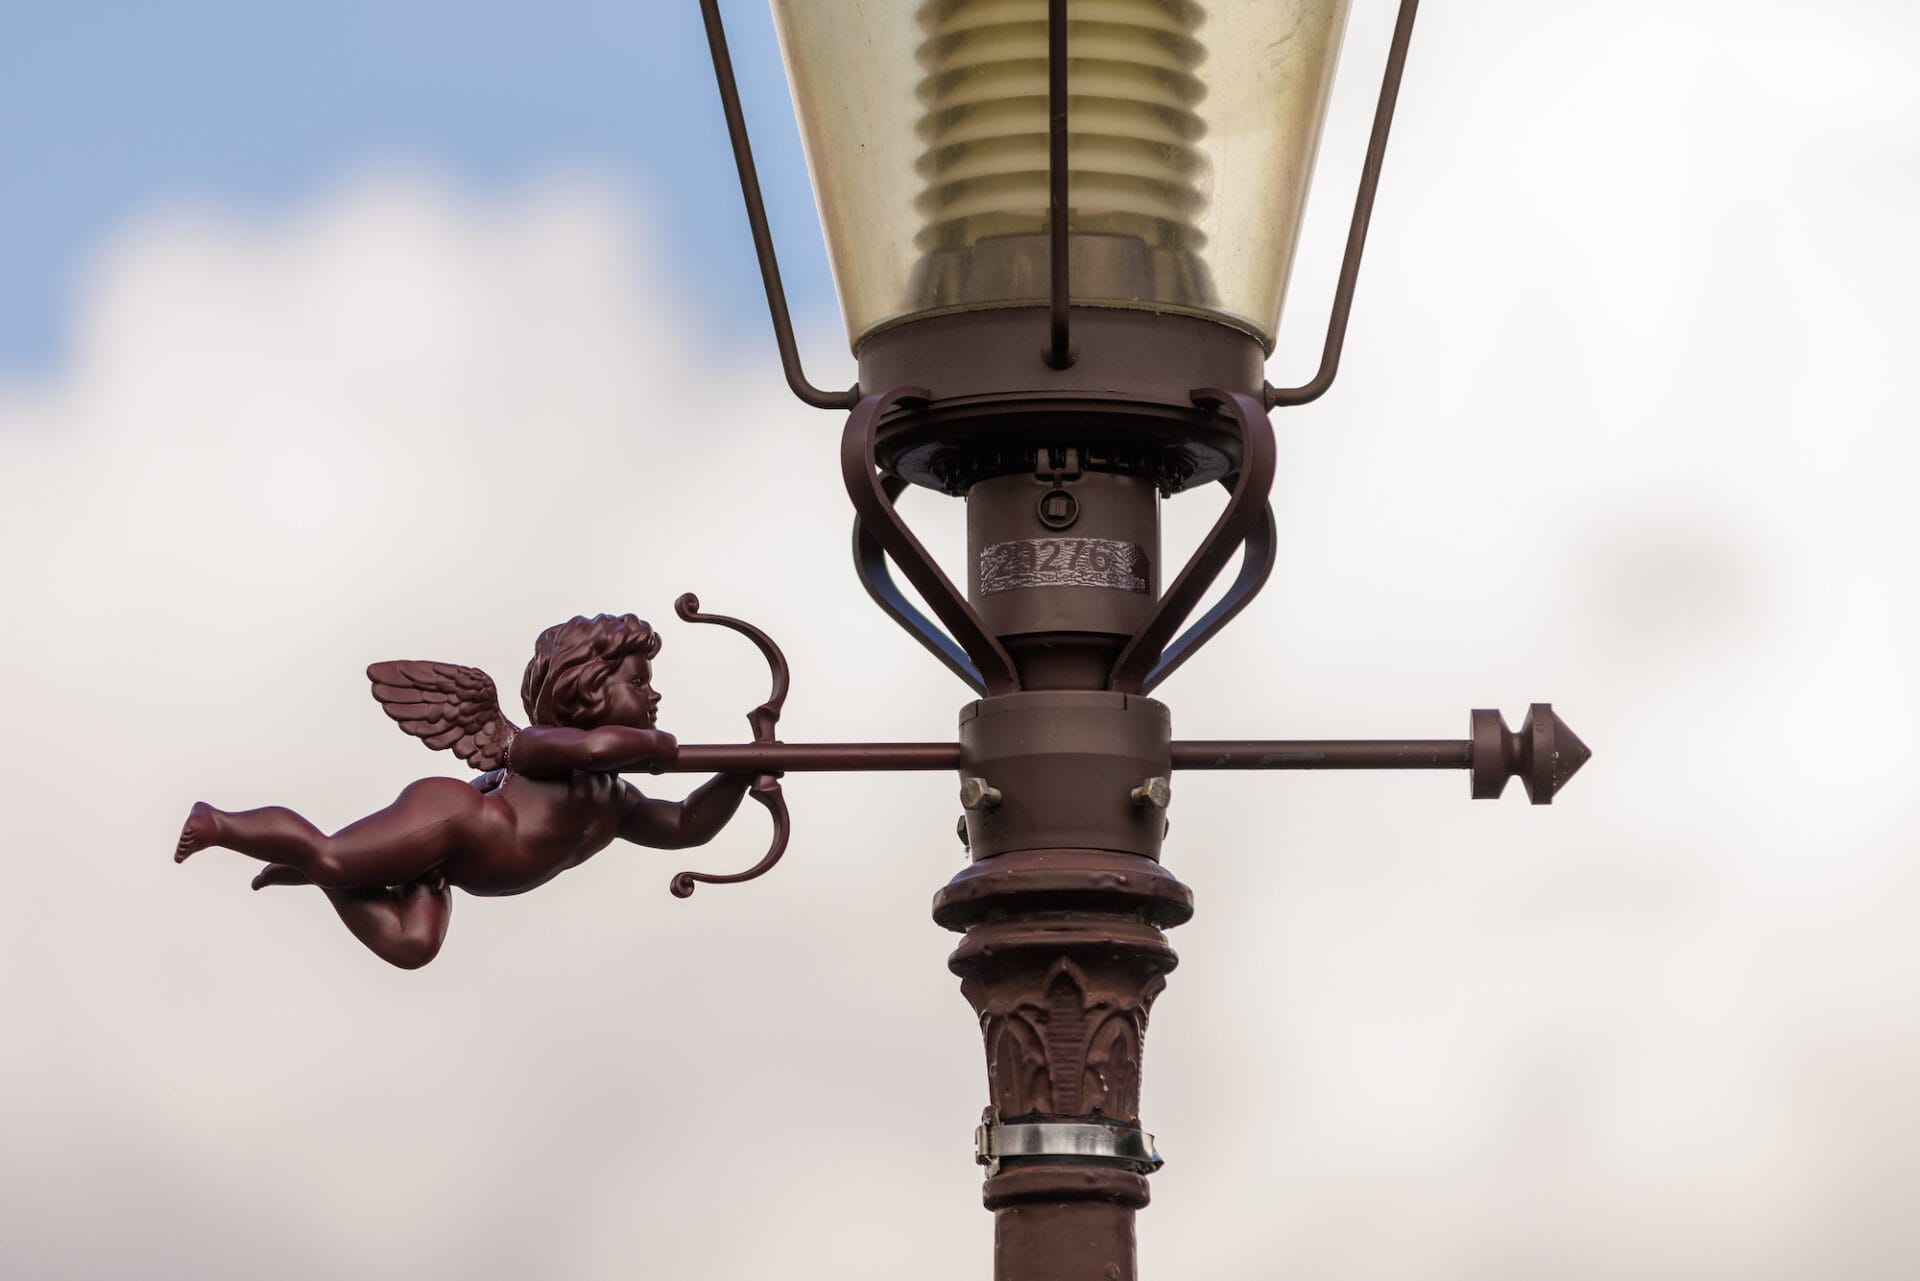 A sculptural intervention on a light post in which a cupid shoots an arrow through the post.